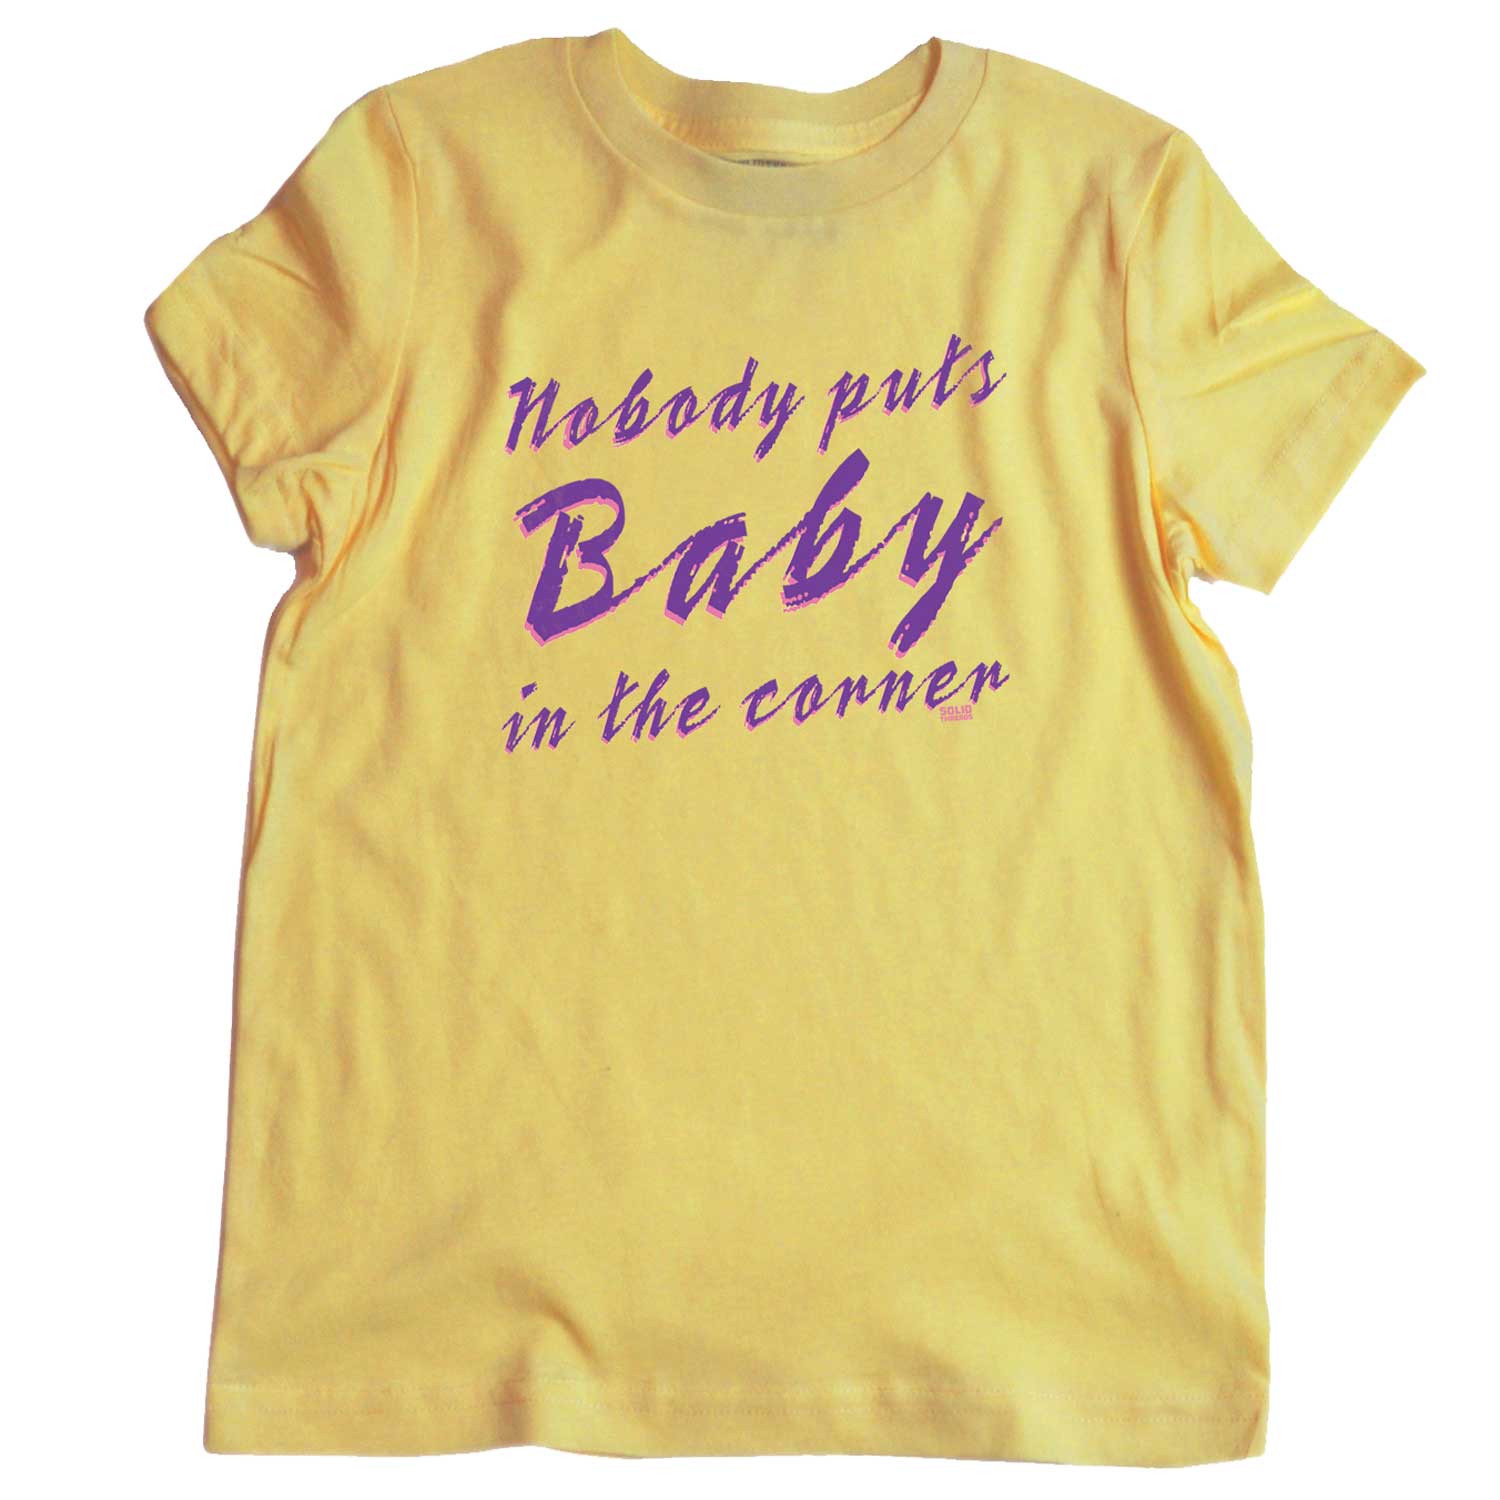 Stolthed importere etik Kid's Nobody Puts Baby in Corner Graphic Tee | Retro 80s Movie T-shirt -  Solid Threads